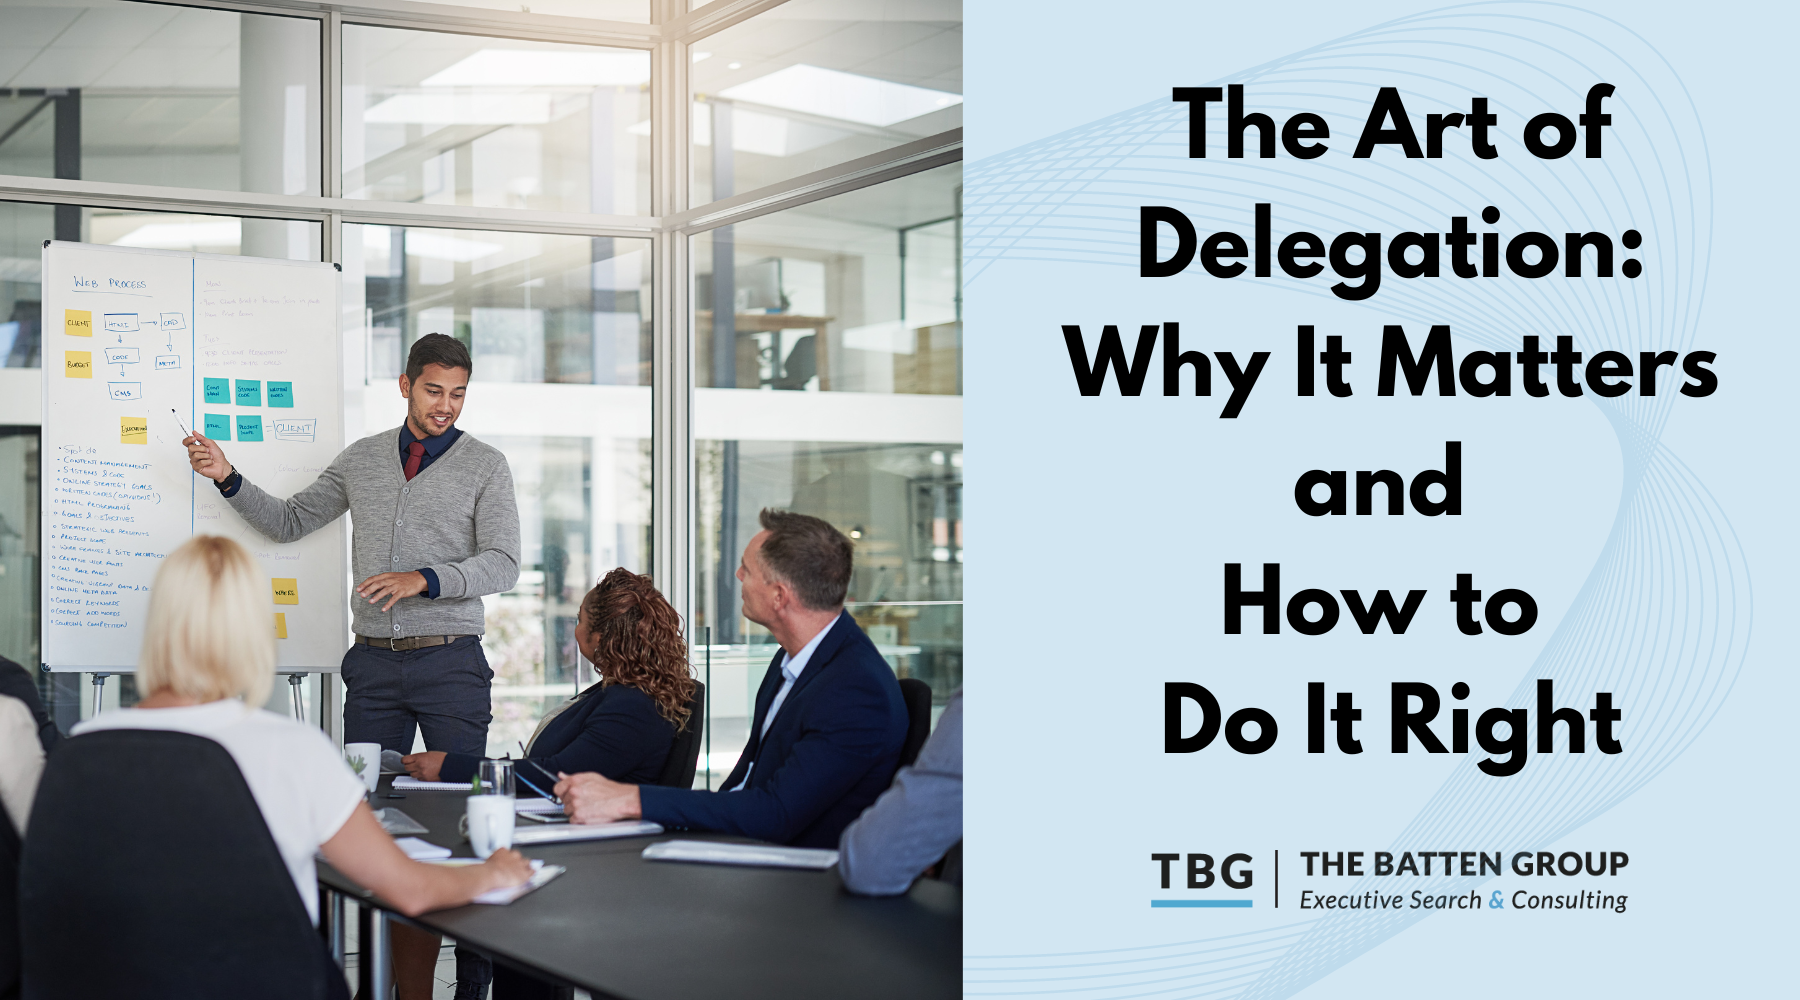 The Art of Delegation: Why It Matters and How to Do It Right